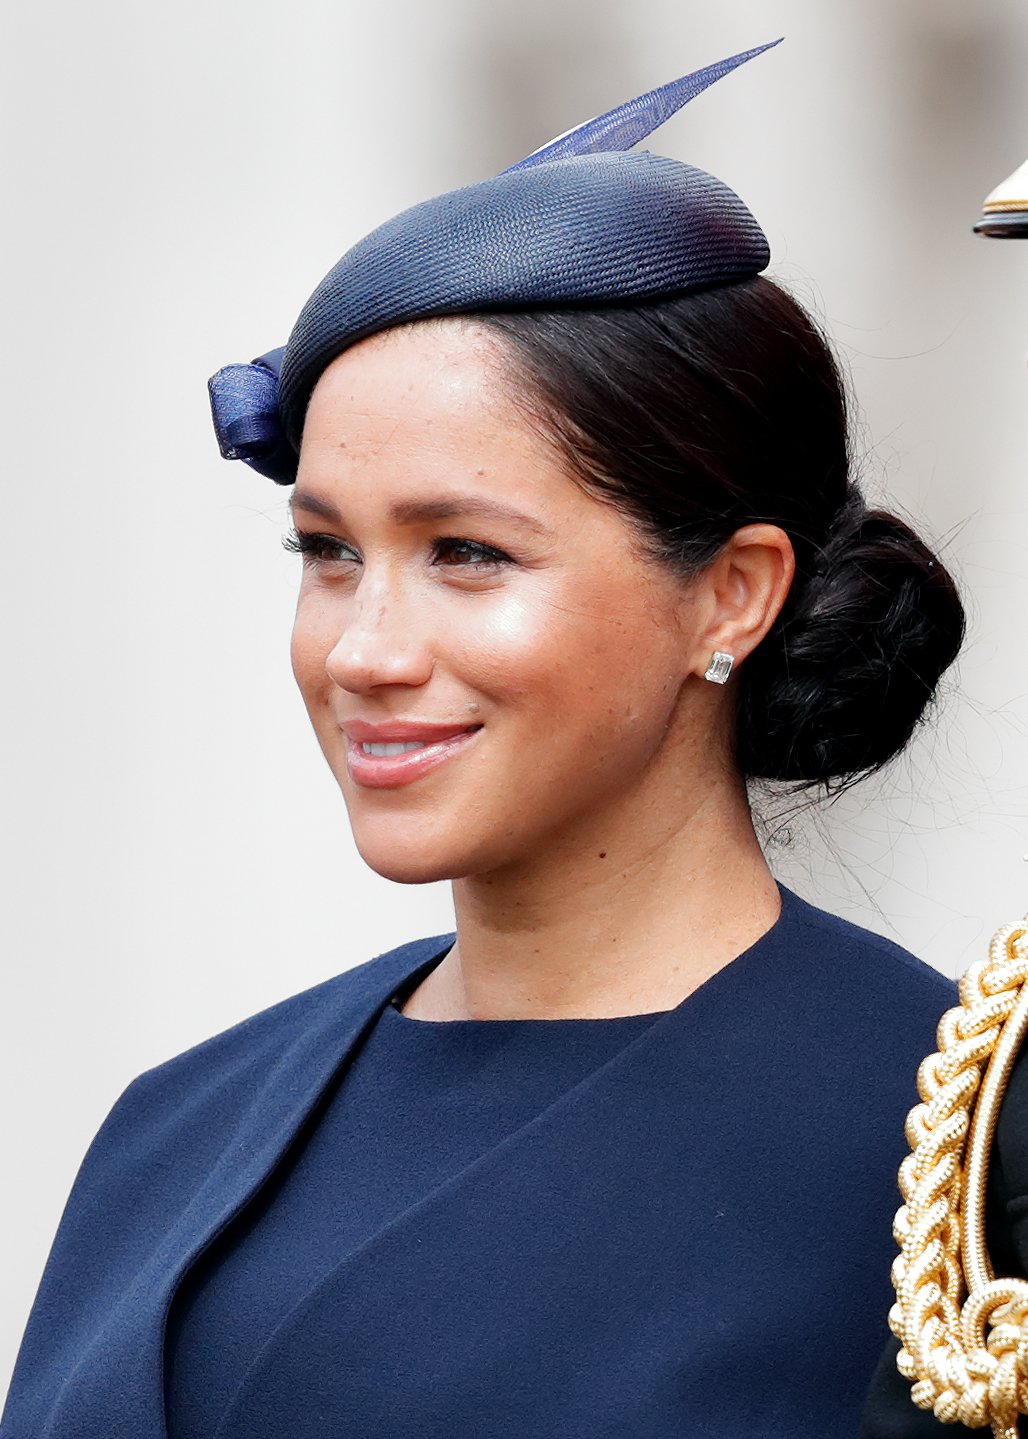 Meghan Markle at the Trooping The Color 2019 | Source: Getty Images